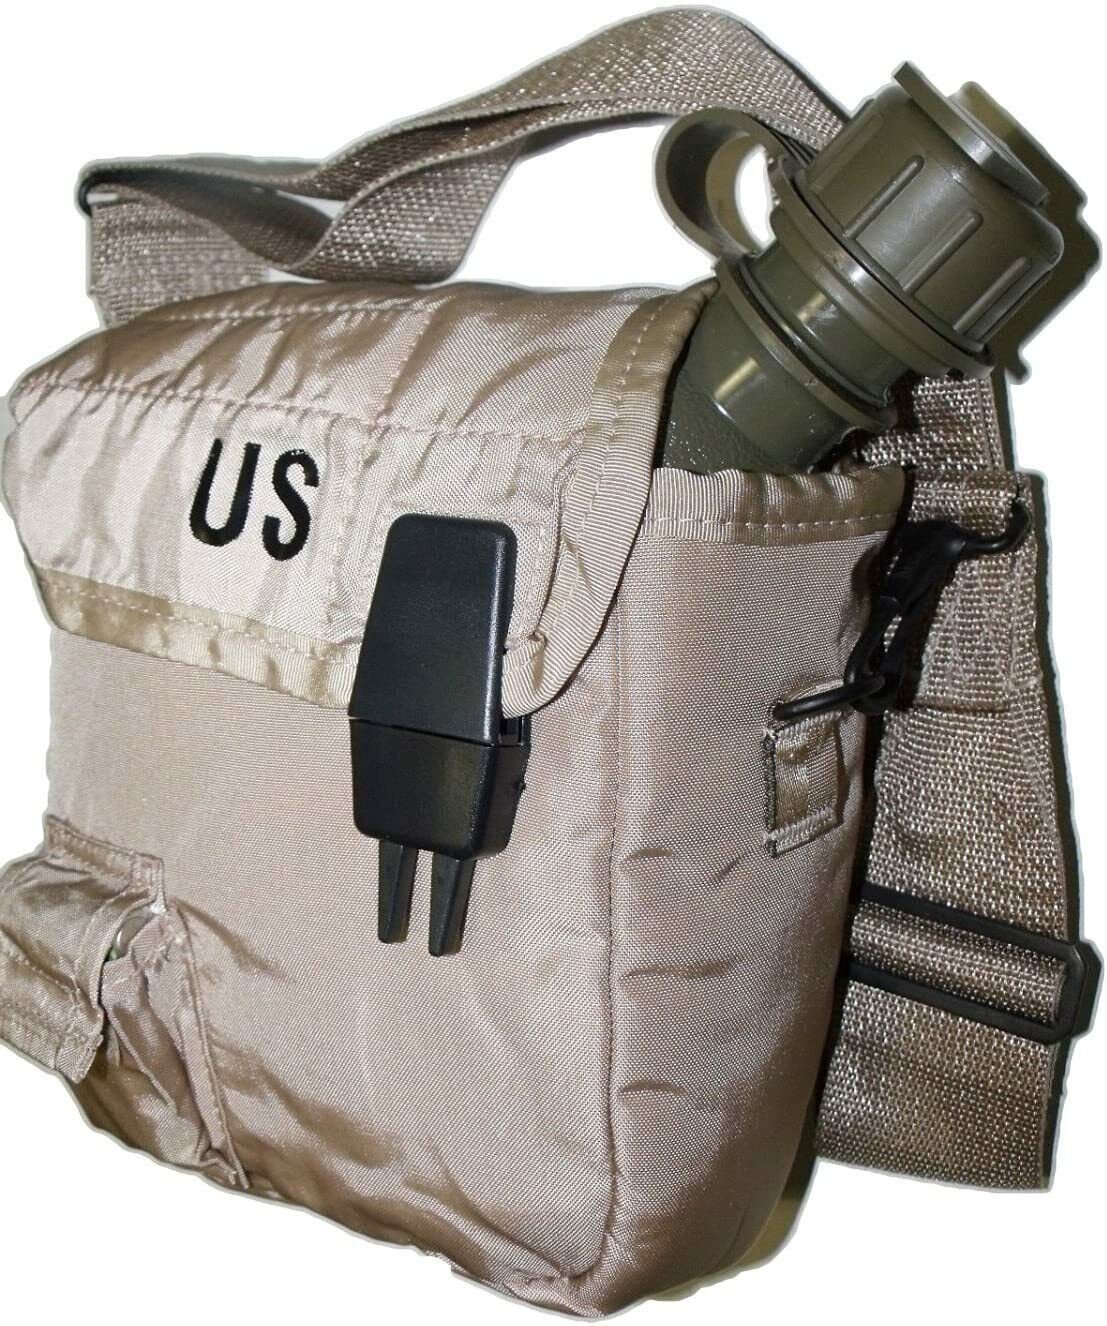 New-US GI 2 Qt Canteen with Carrier/Cover and Shoulder Strap,Un-Issued Surplus 